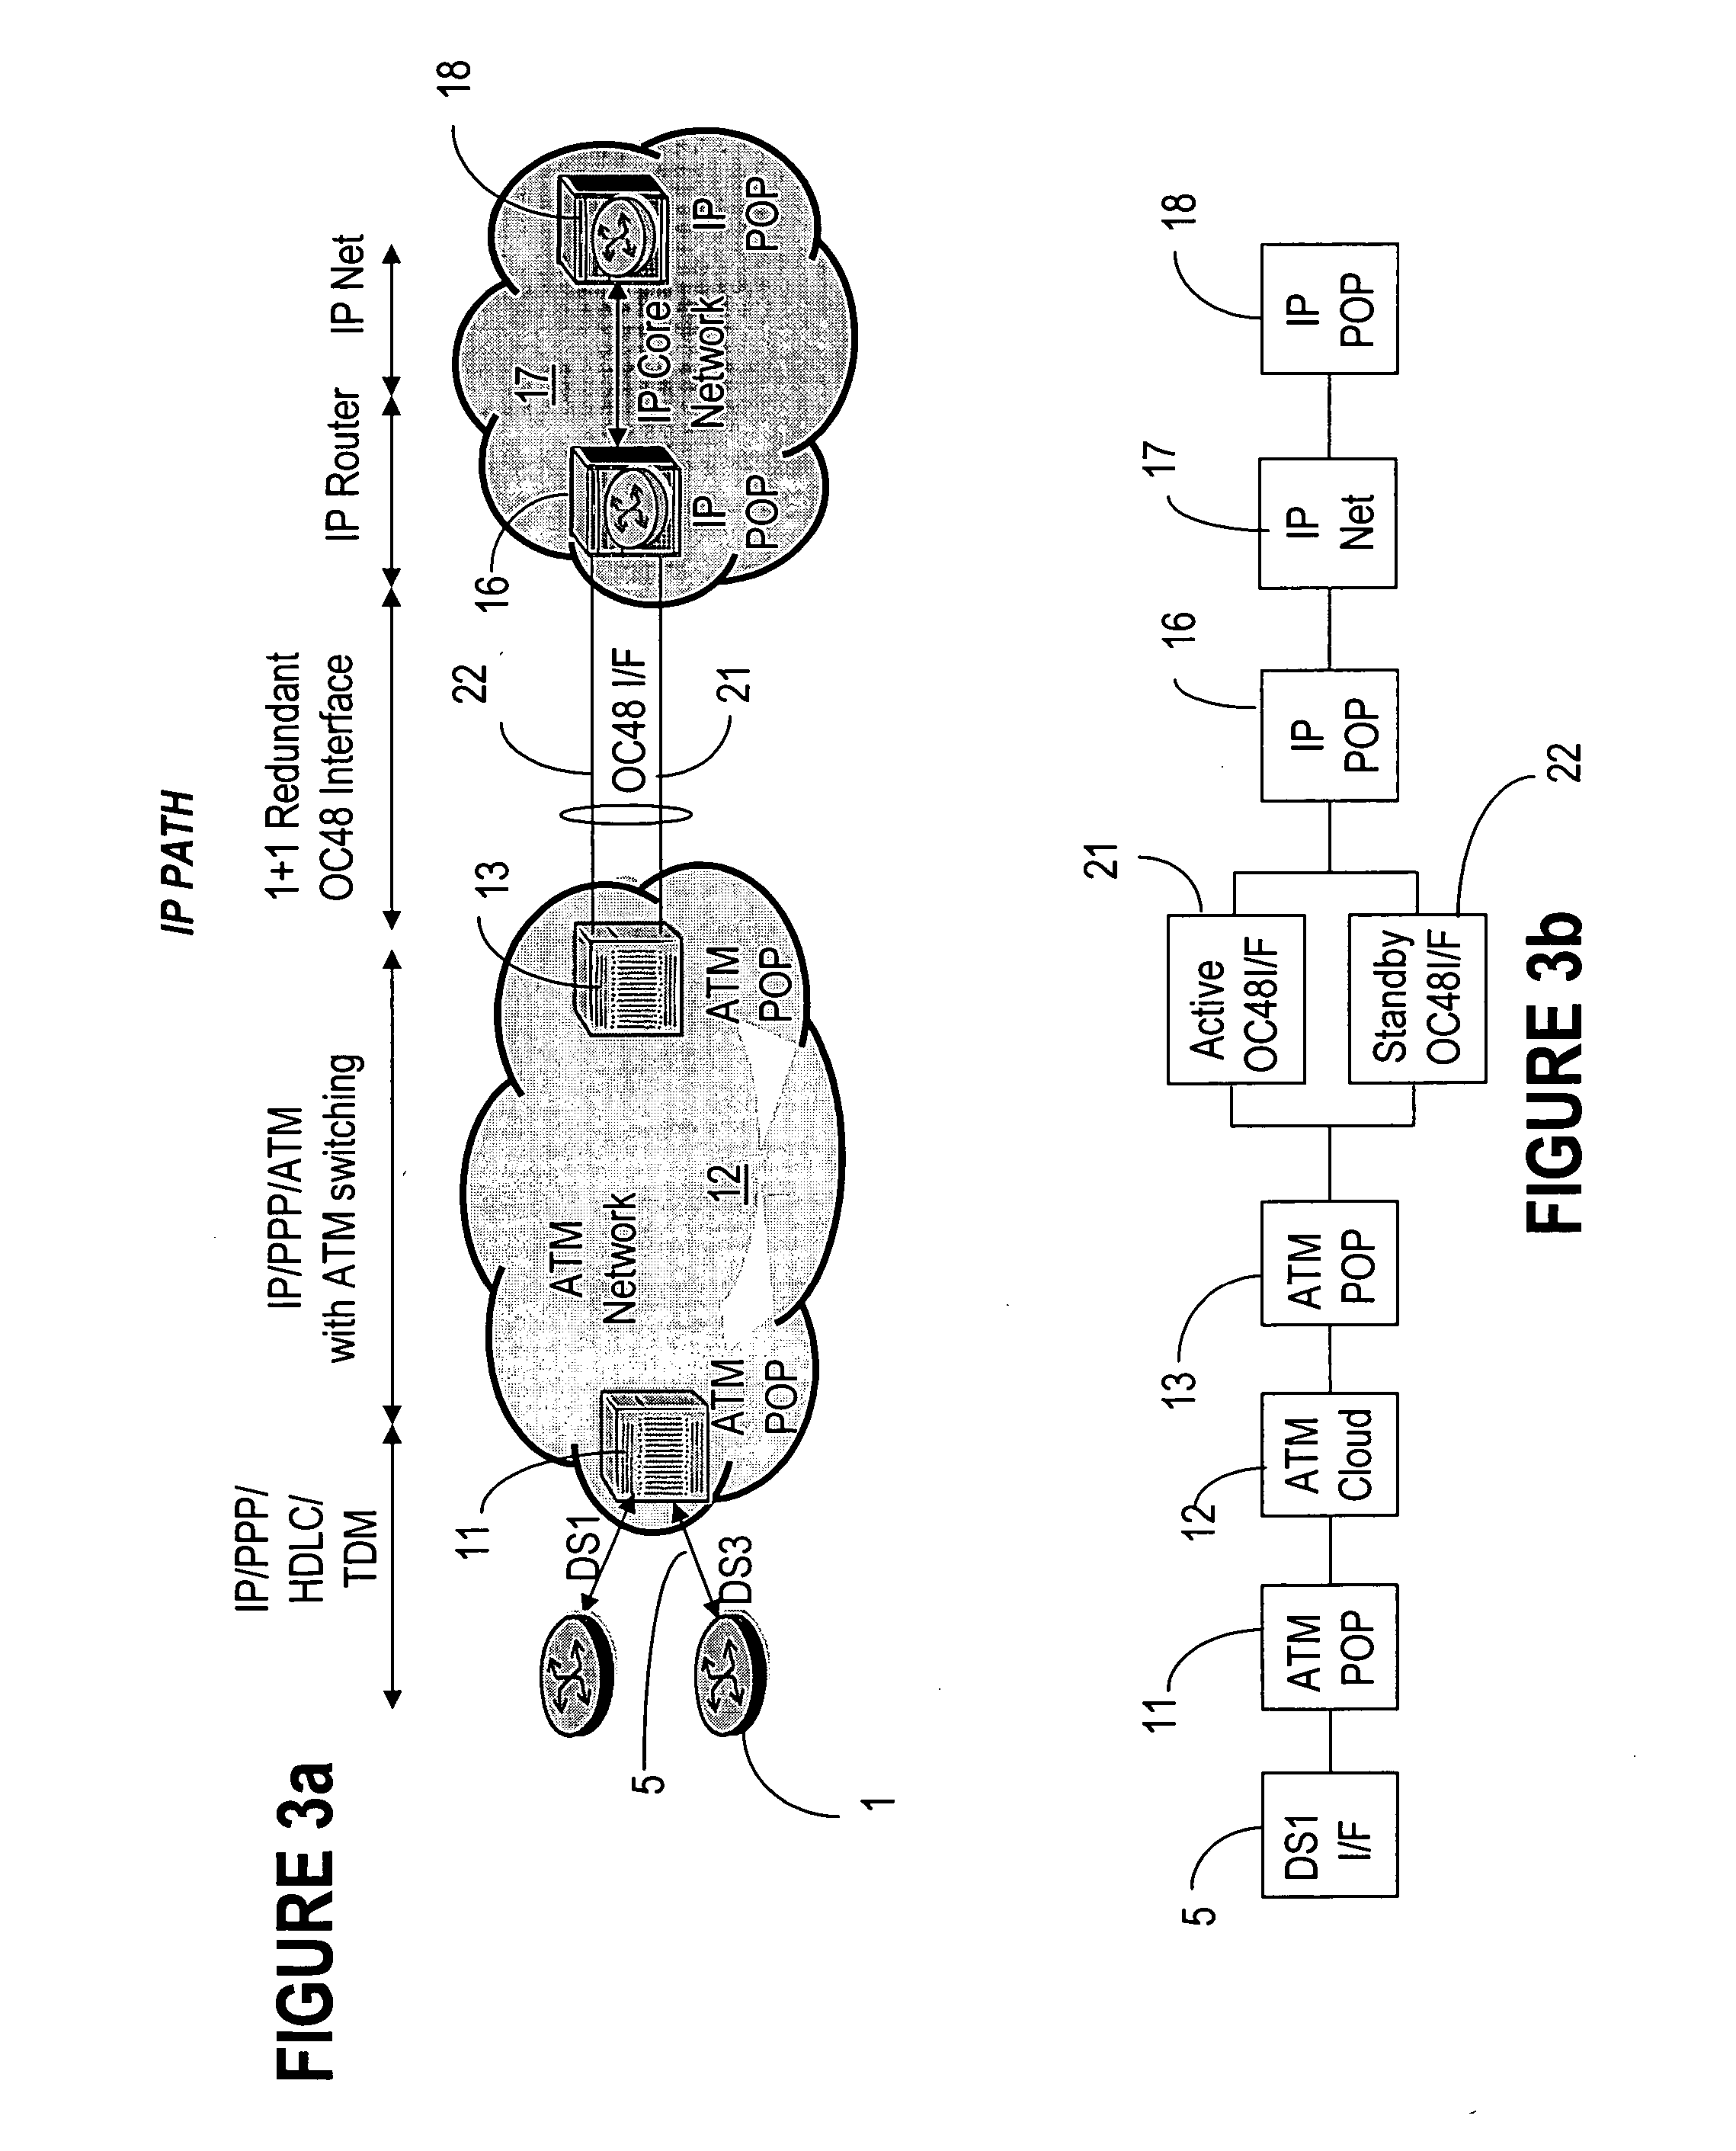 Method of networking systems reliability estimation